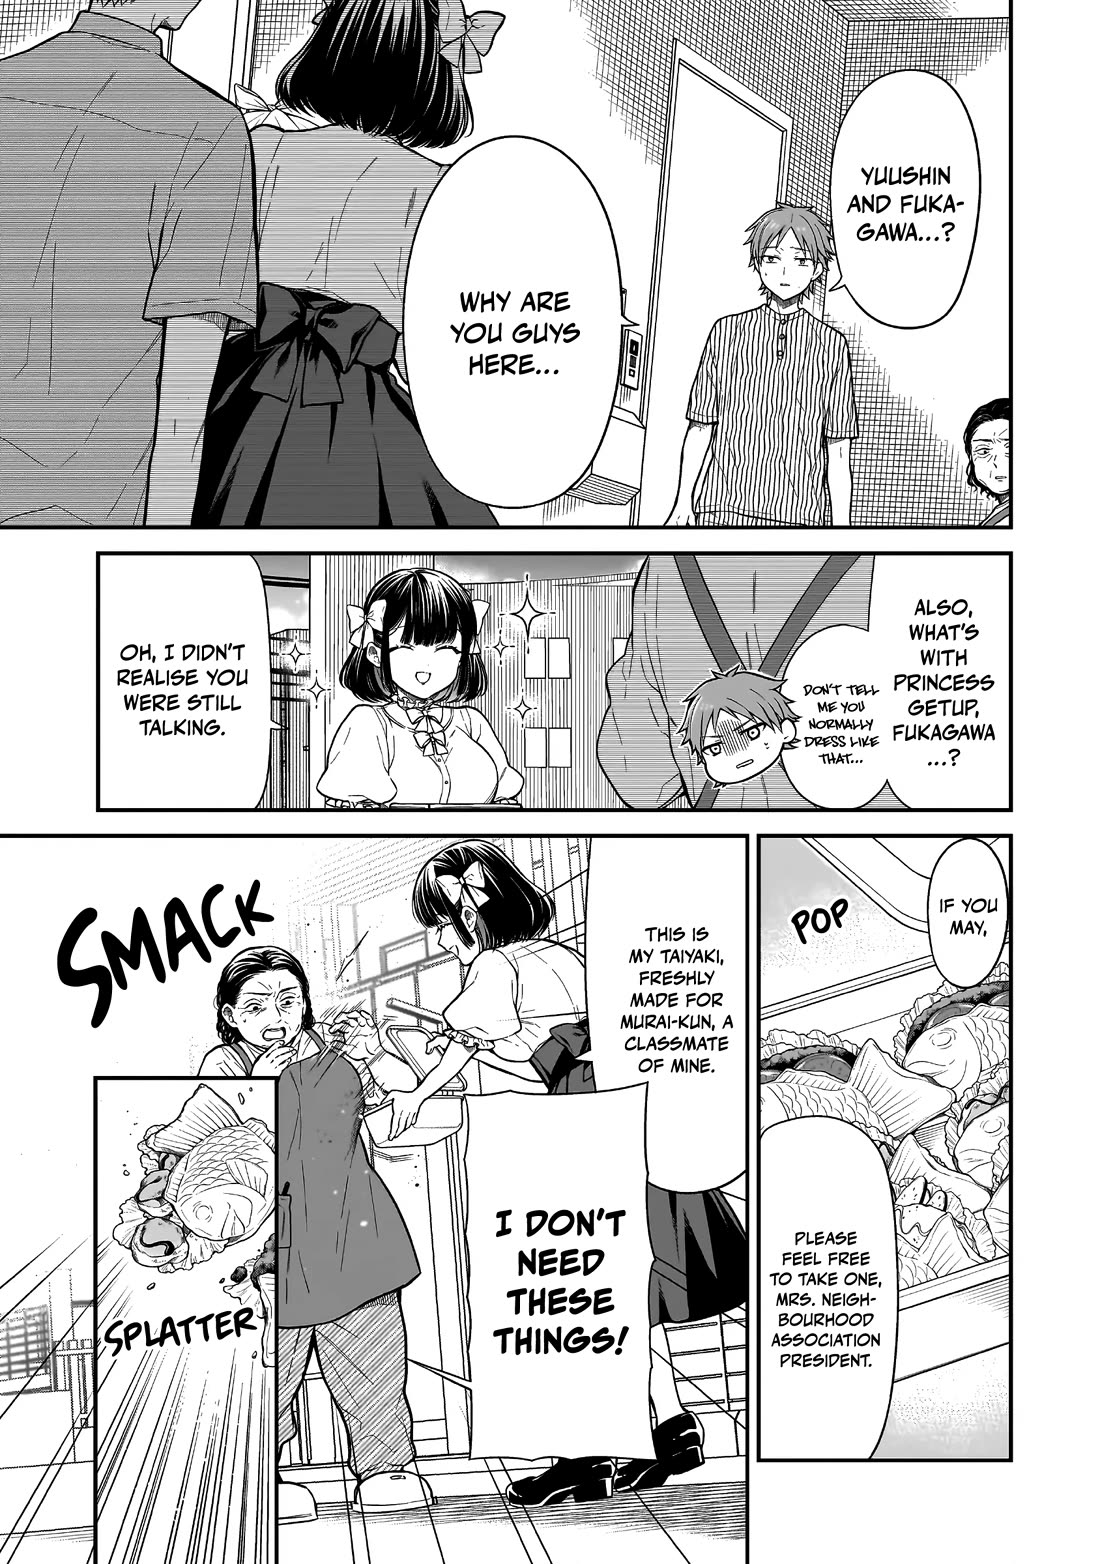 Miyu-chan Will Always Be Your Friend - chapter 4 - #4